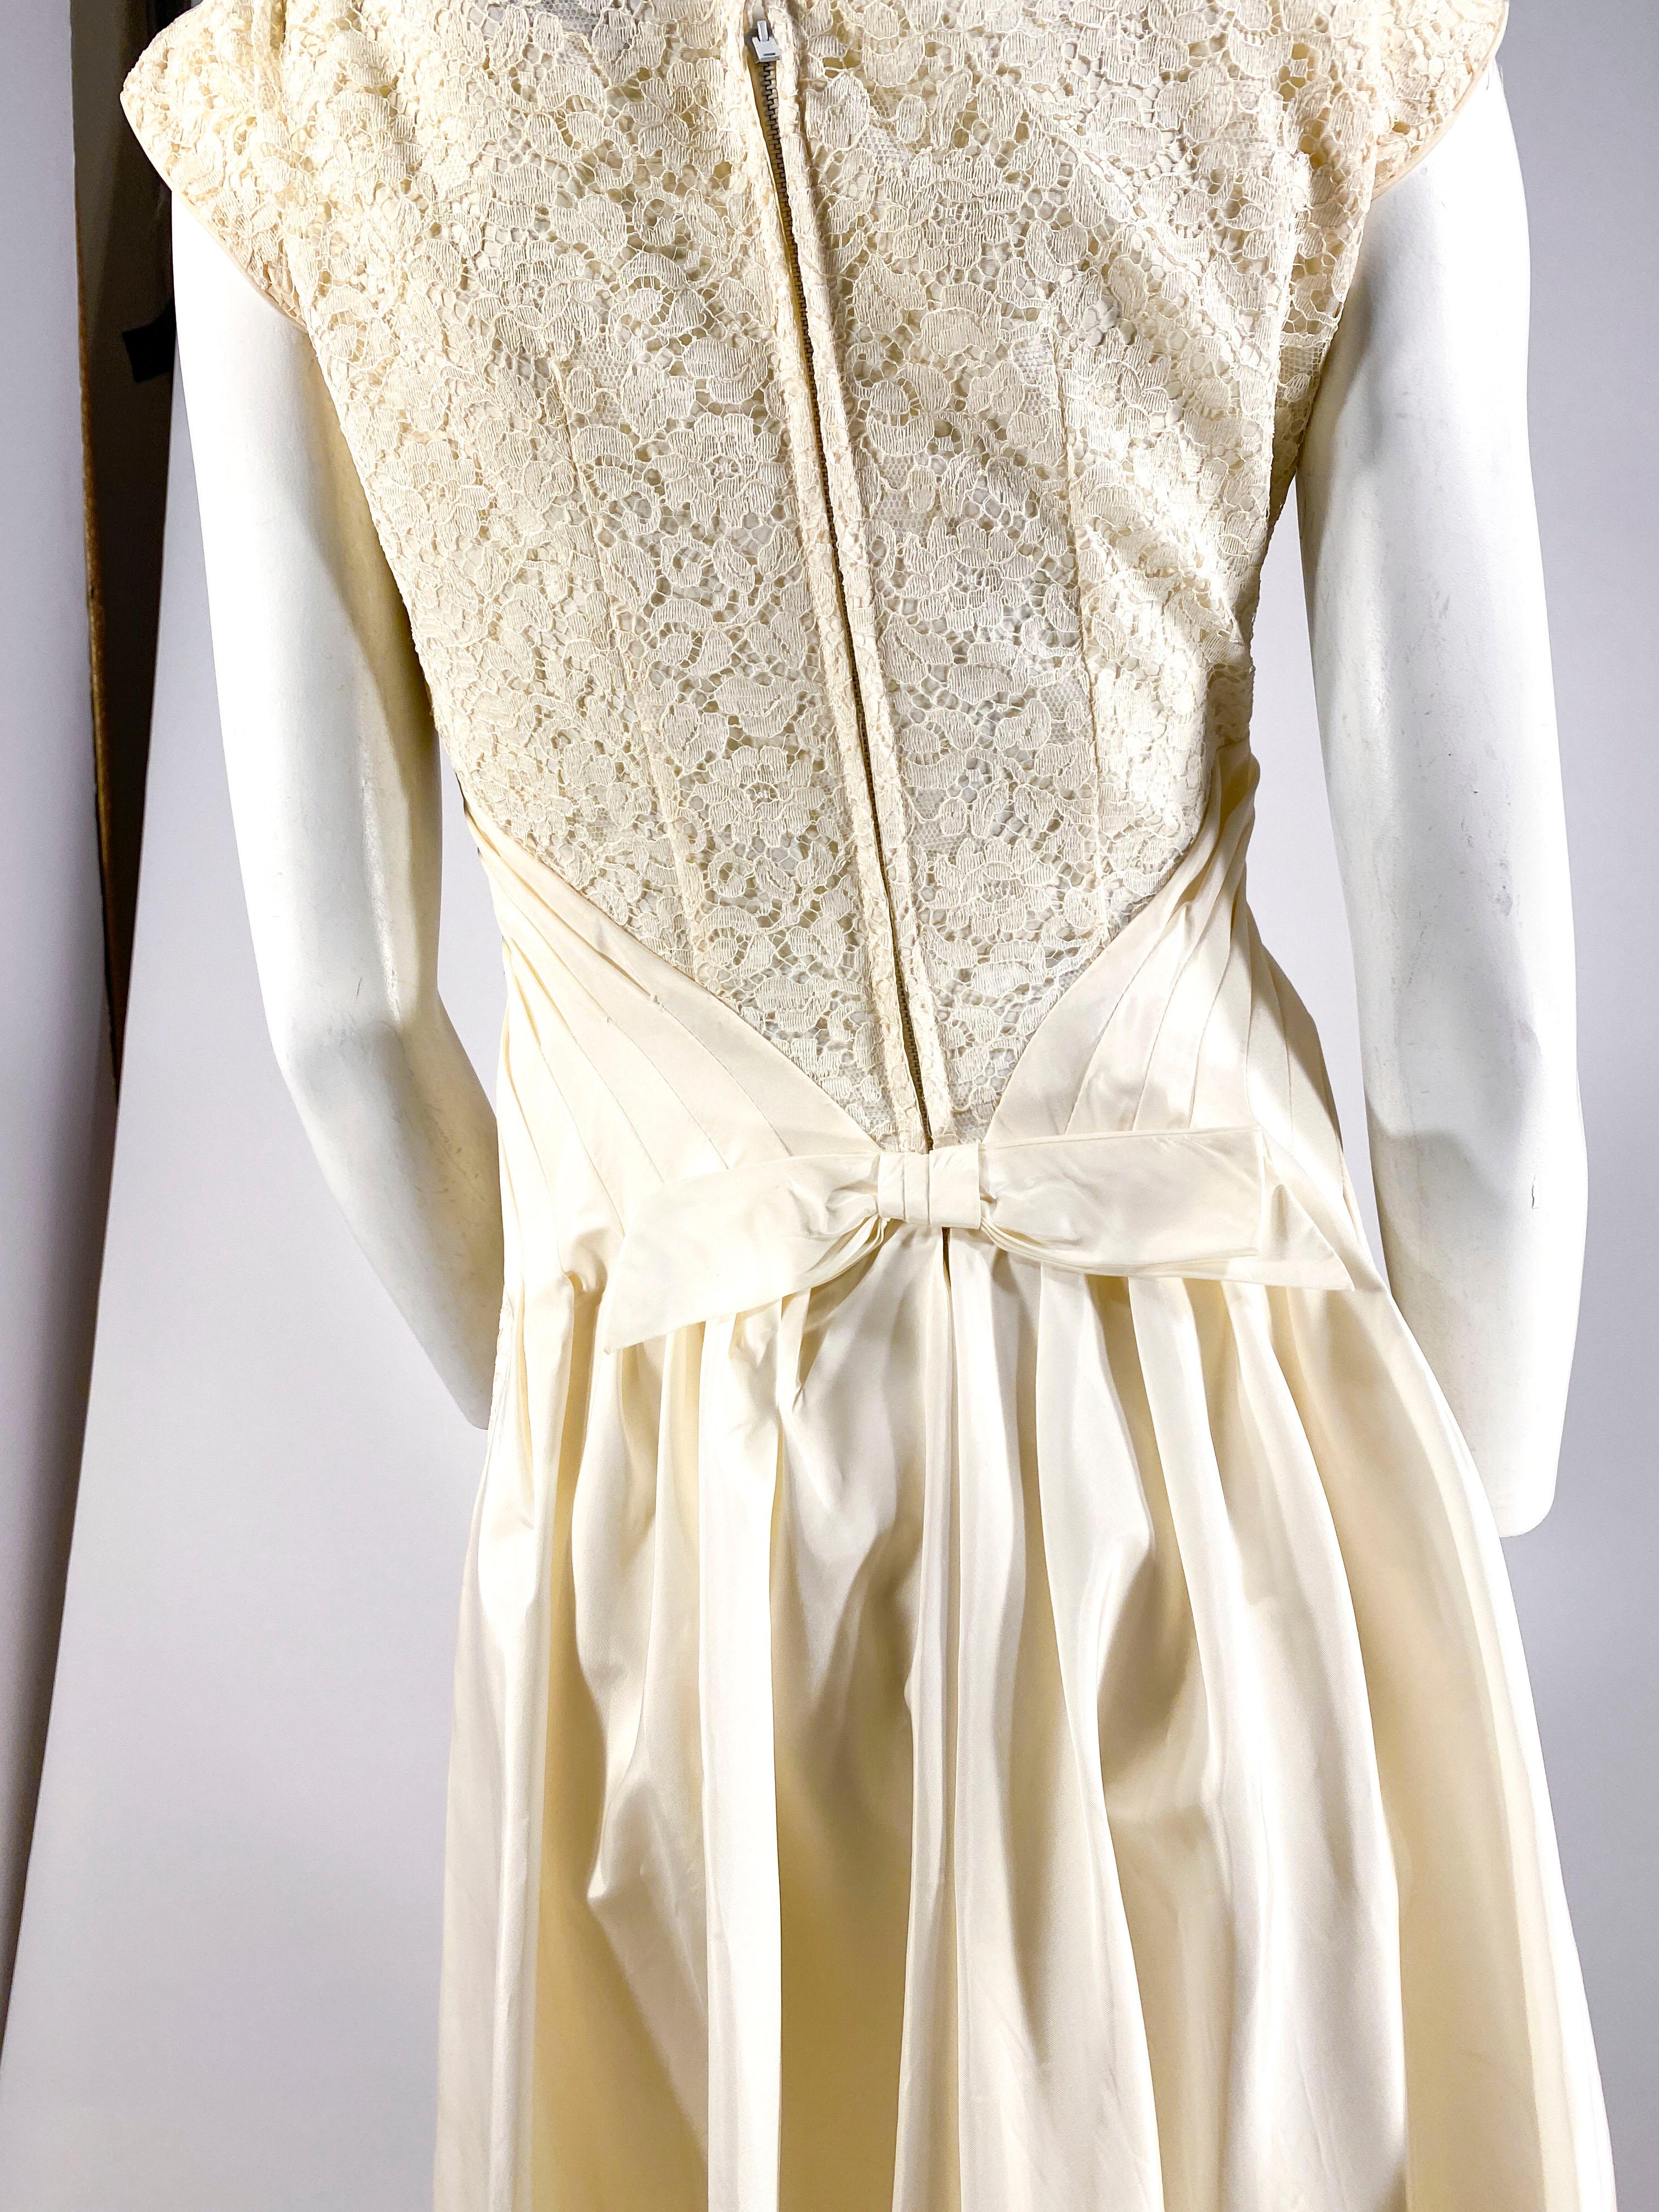 Women's 1950s Emma Domb Off-white Lace Dress with Taffeta Waist and Draped back For Sale